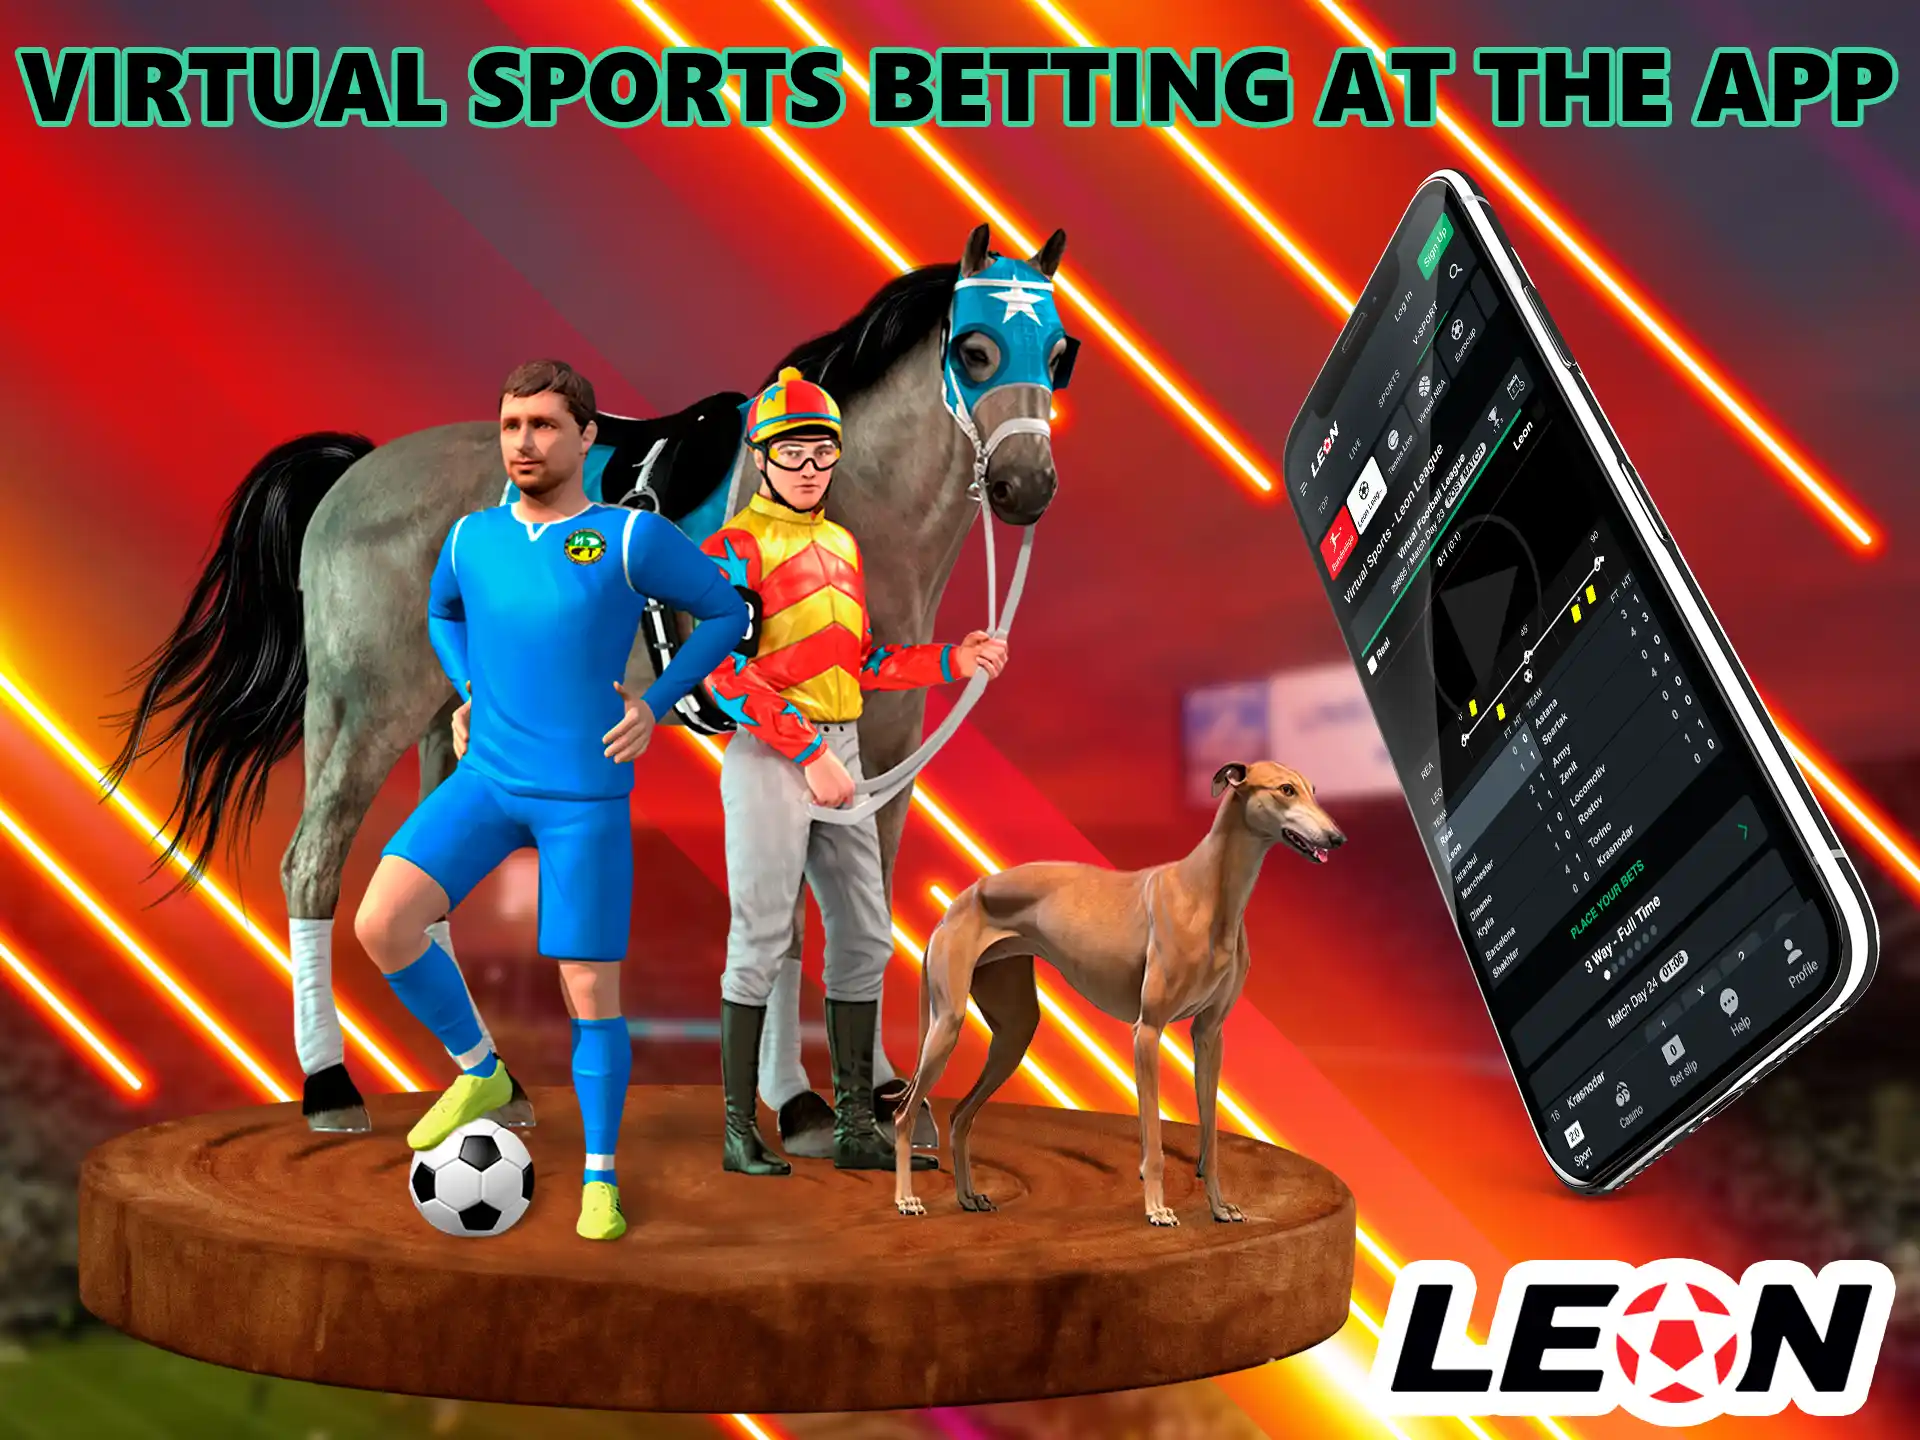 You can create fictional teams and play virtual characters and place bets in the Leon Bet App.